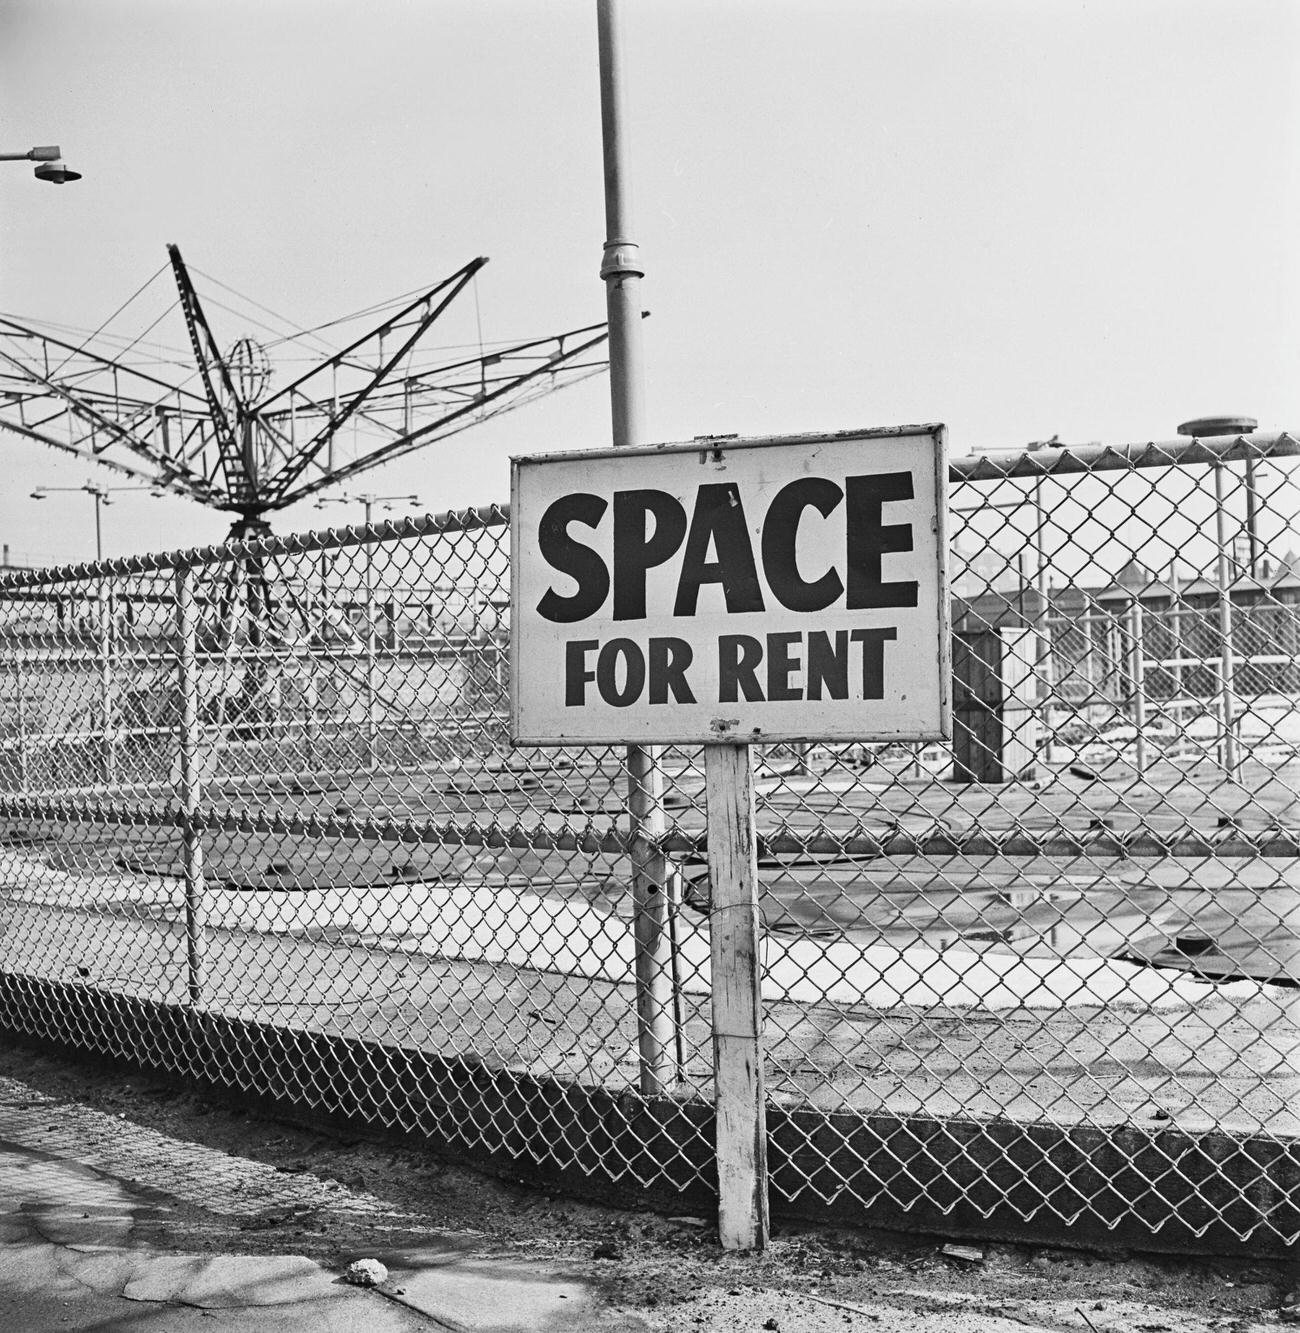 'Space For Rent' Placard At Coney Island, Brooklyn, 1950.